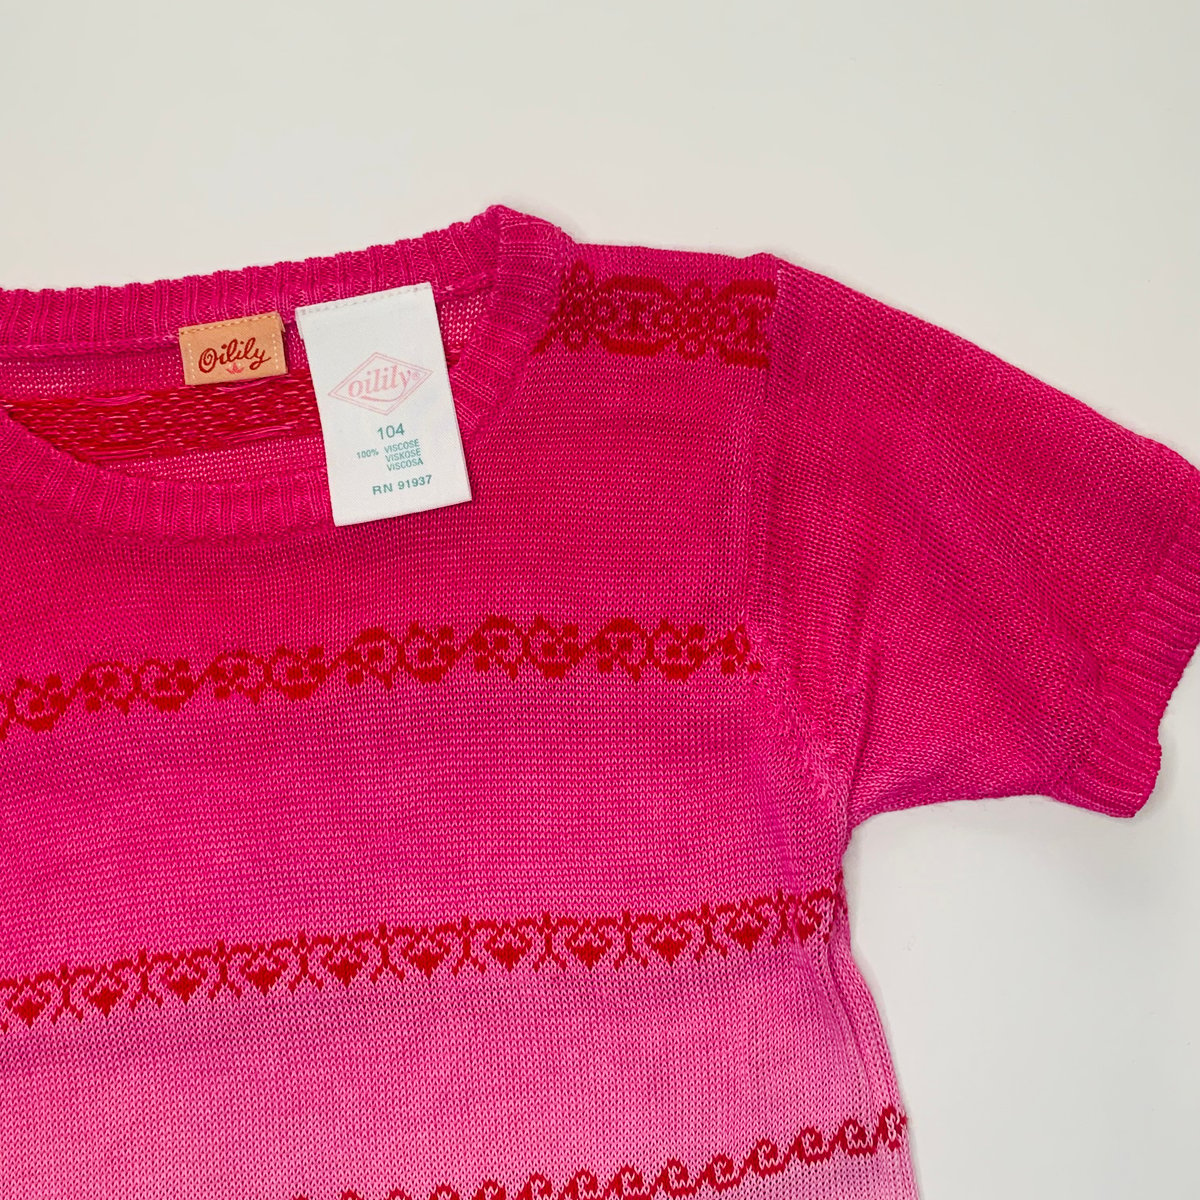 Image of Oilily jumper Size 4 years 